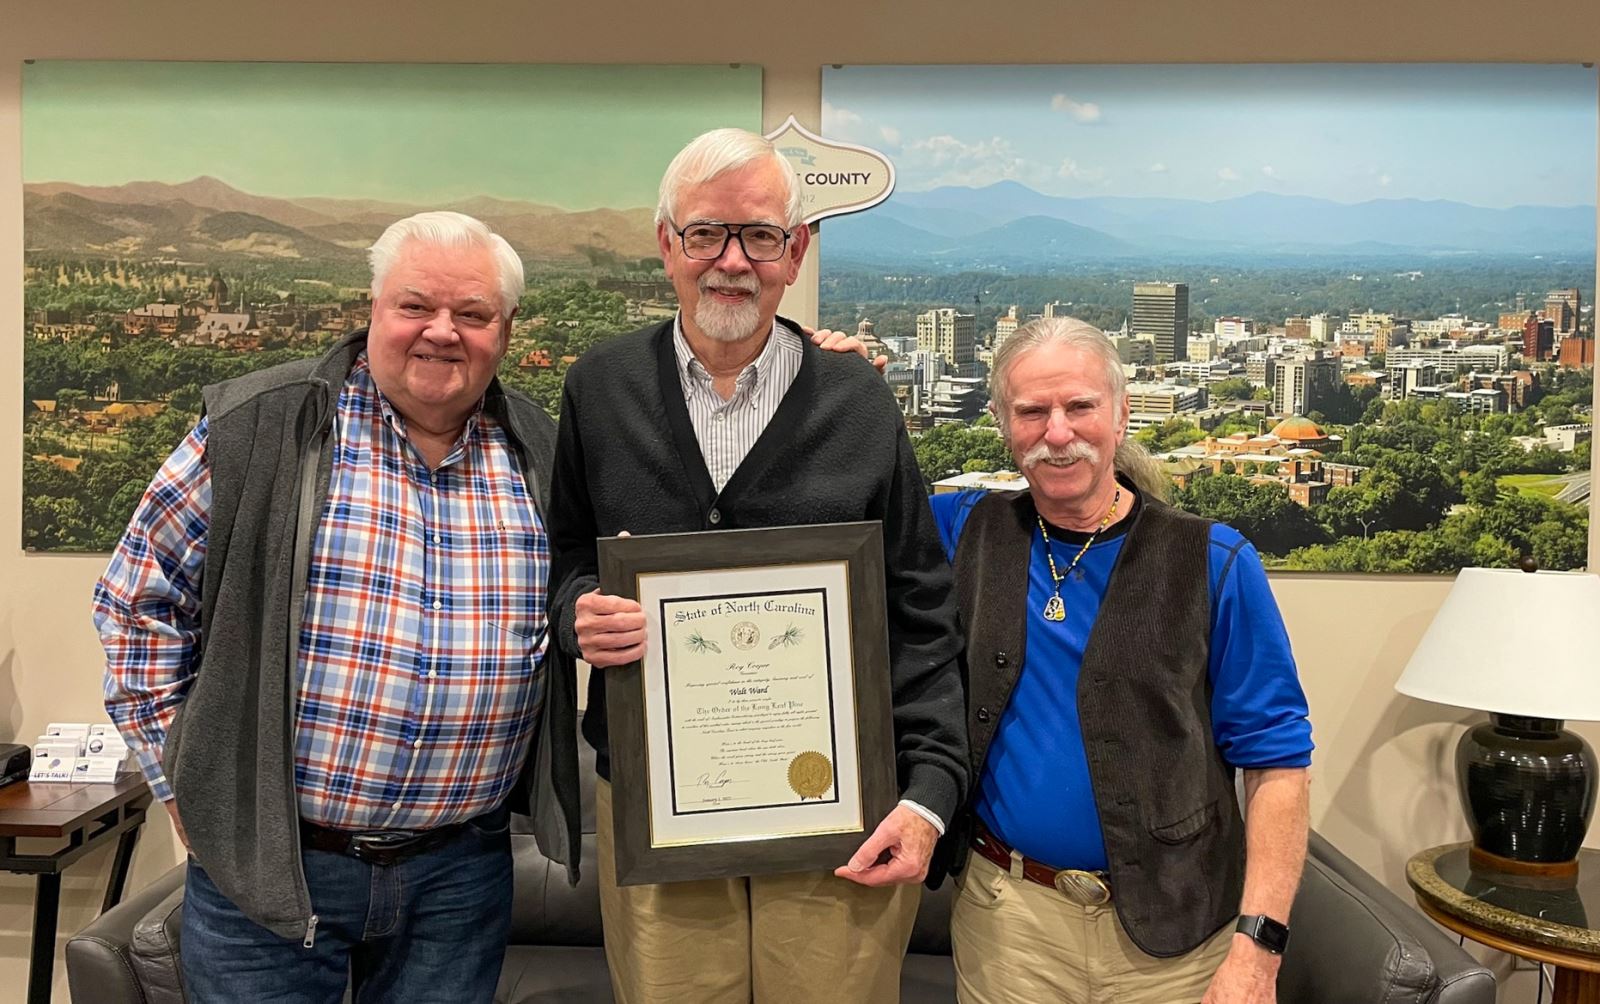 Walt Ward - Honored with the Order of the Long Leaf Pine